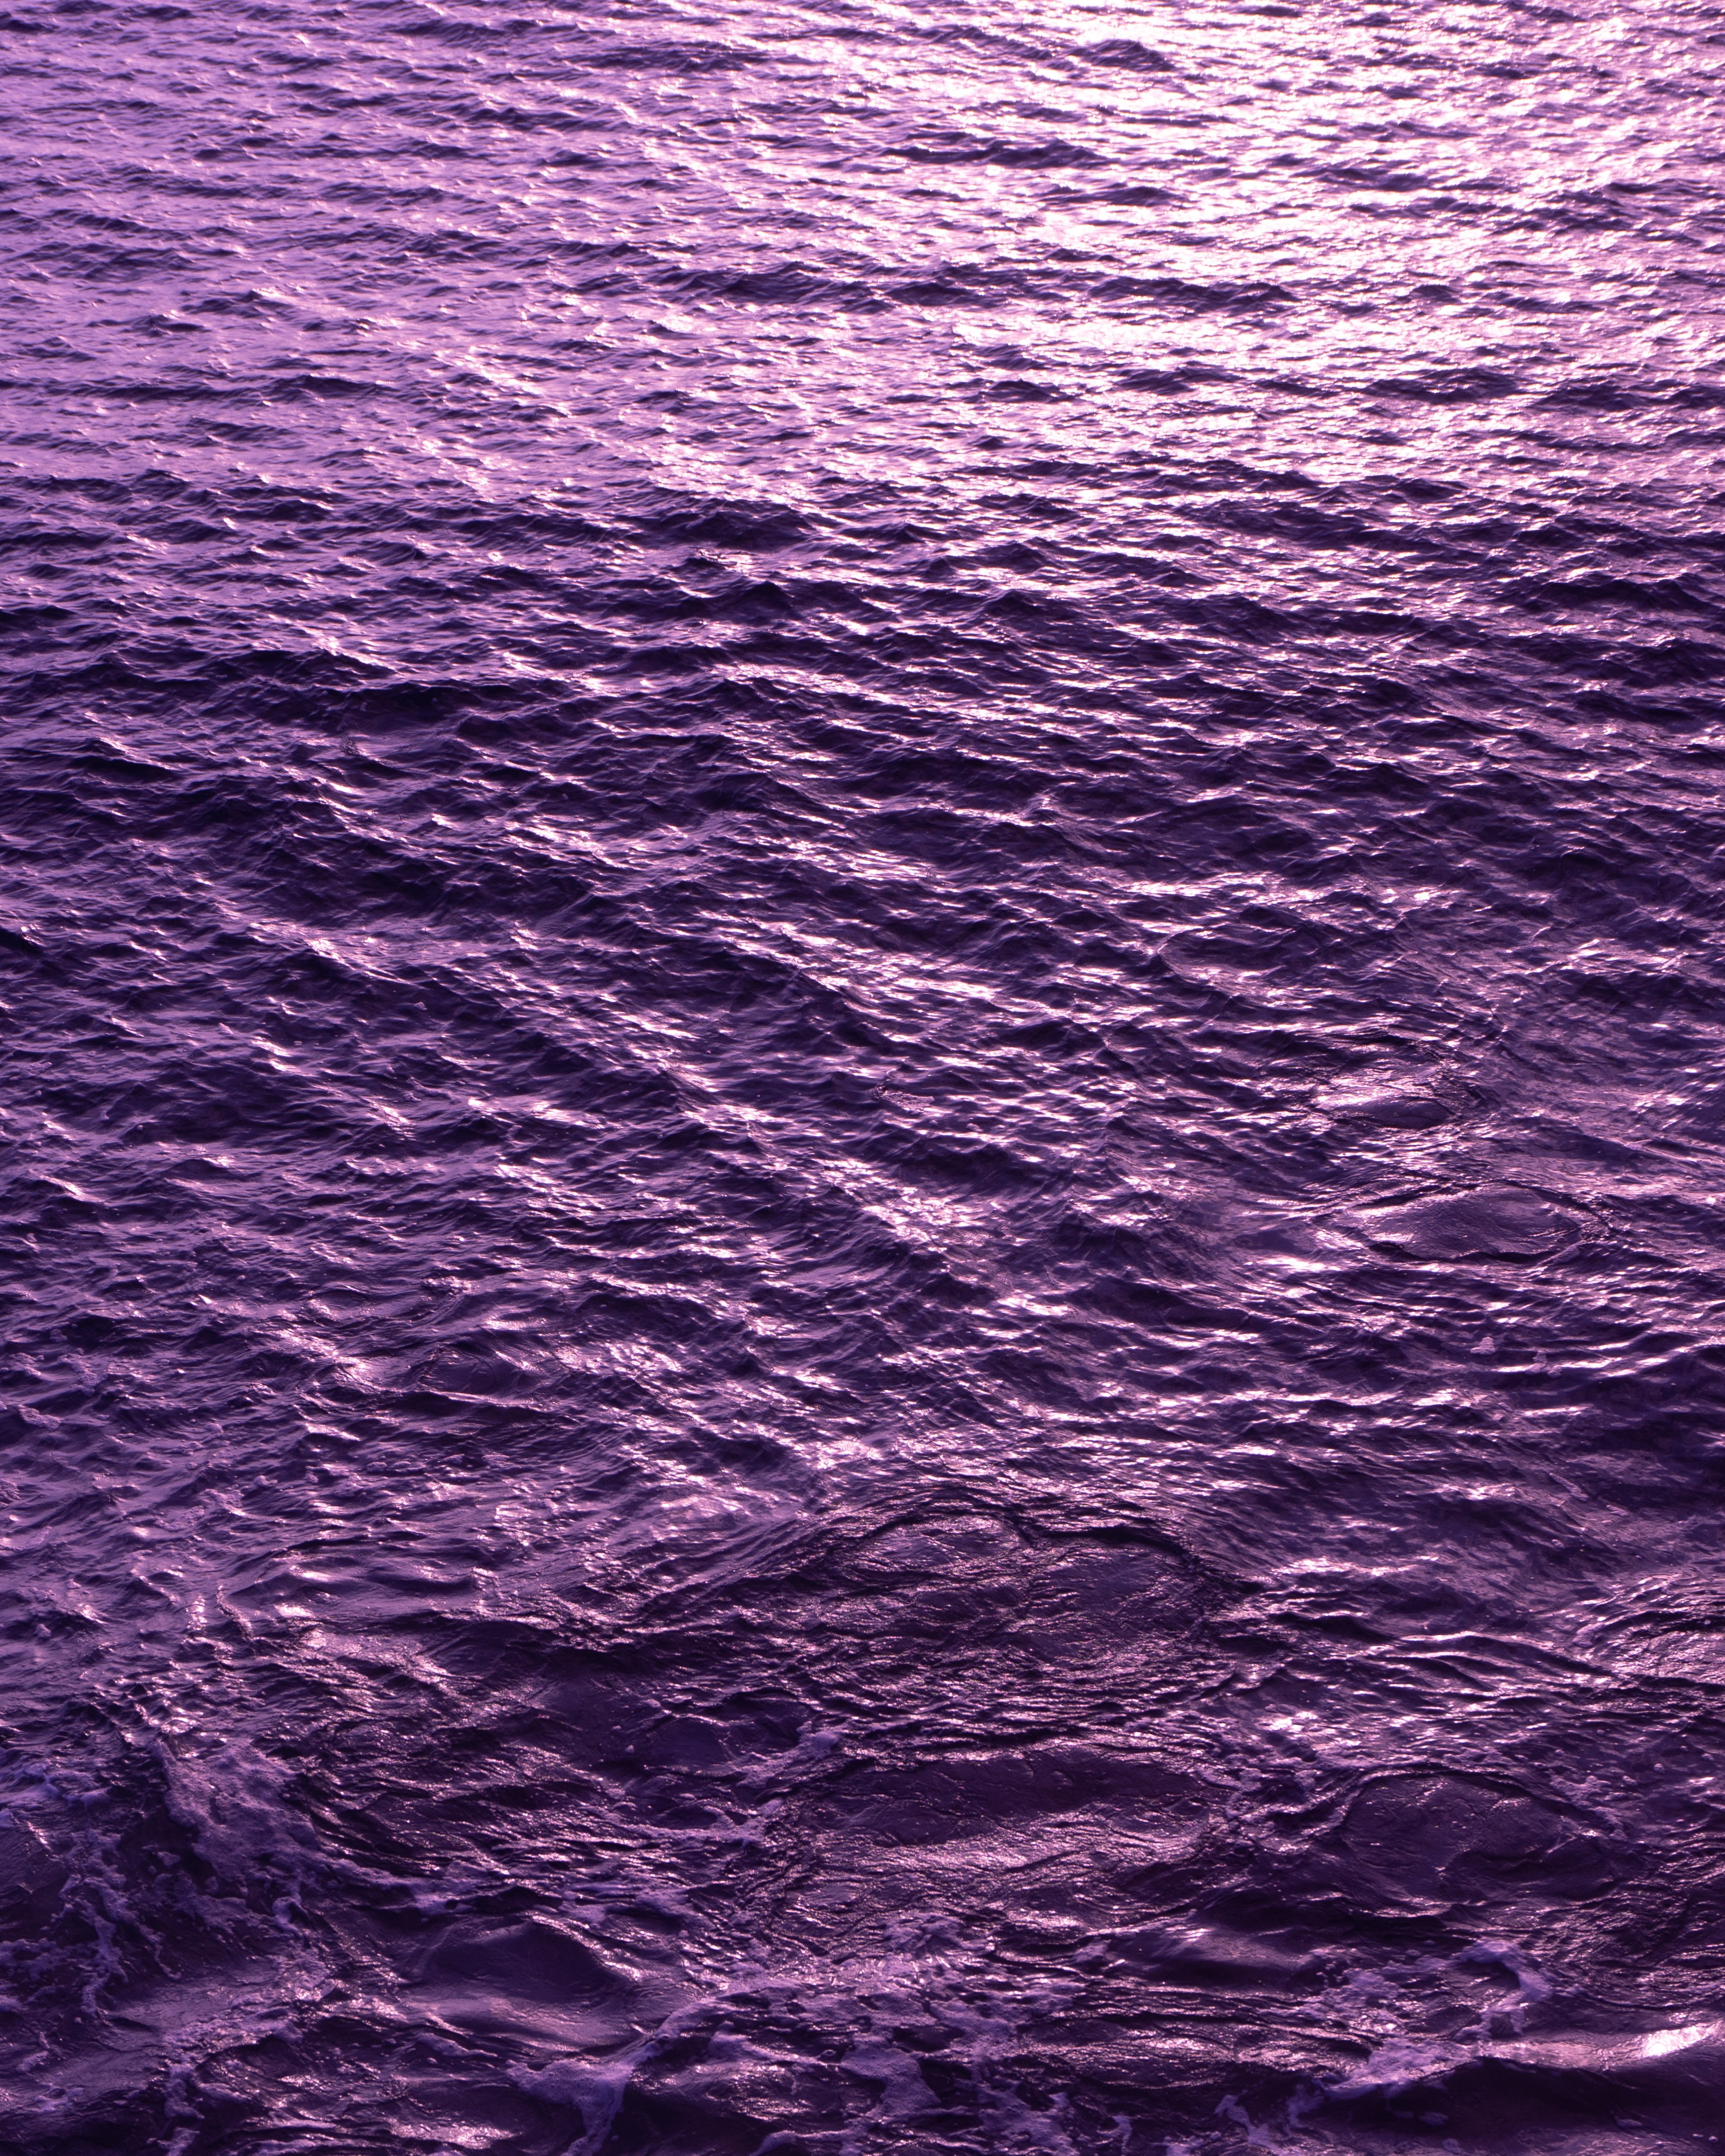 purple, surface, water, nature, waves, violet, ripples, ripple HD wallpaper